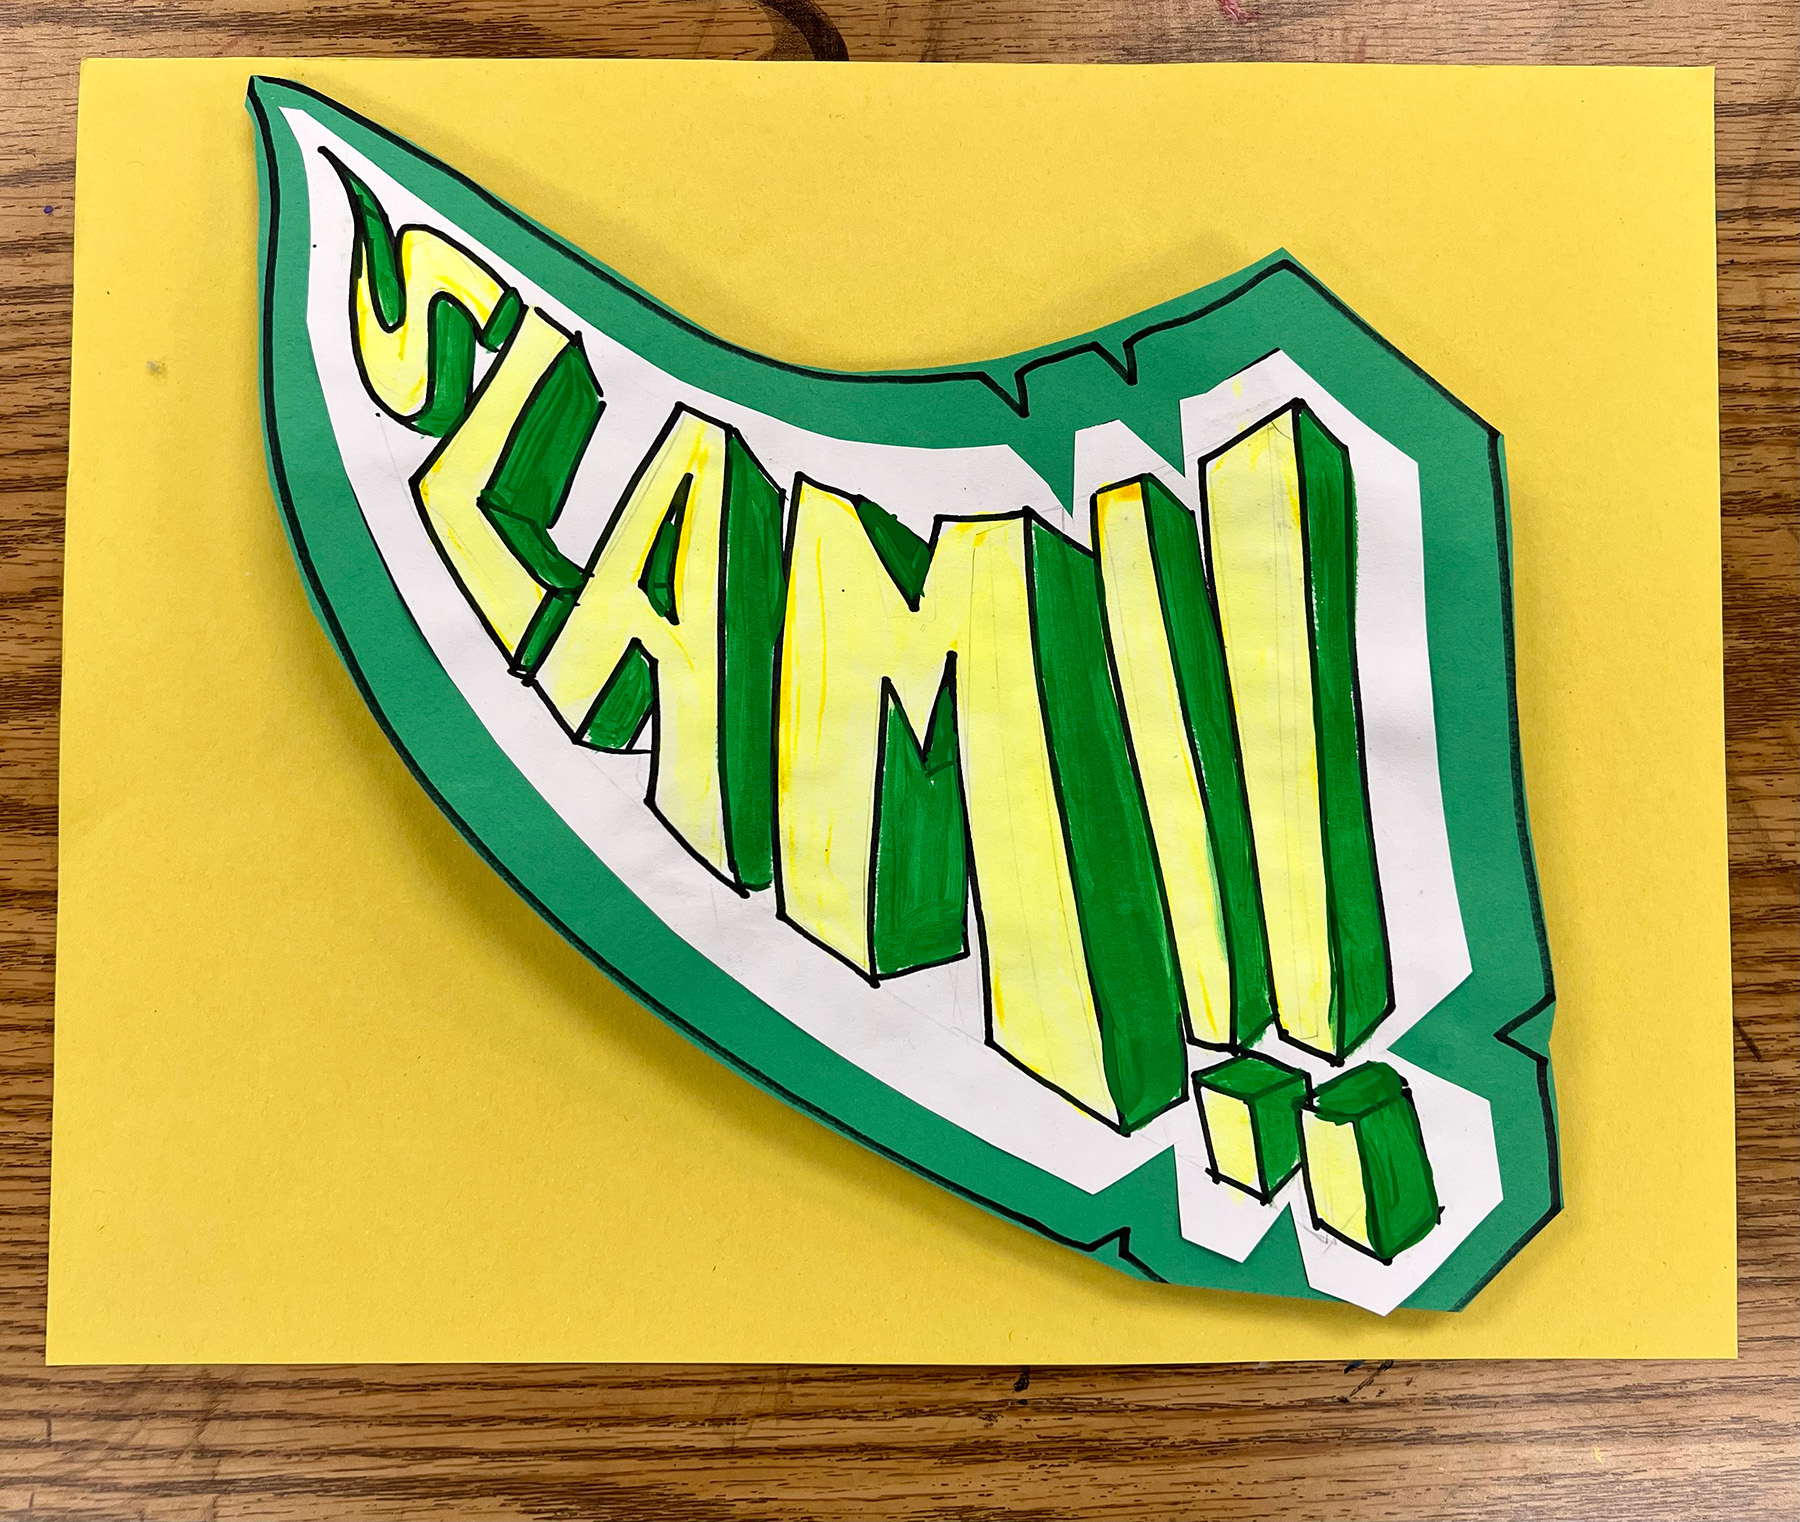 LESSON 4 / LESSON 4: Onomatopoeia Action Art. Student choose a word with a sound and creates an artwork to support that using graphic design, color, line, and shape. 